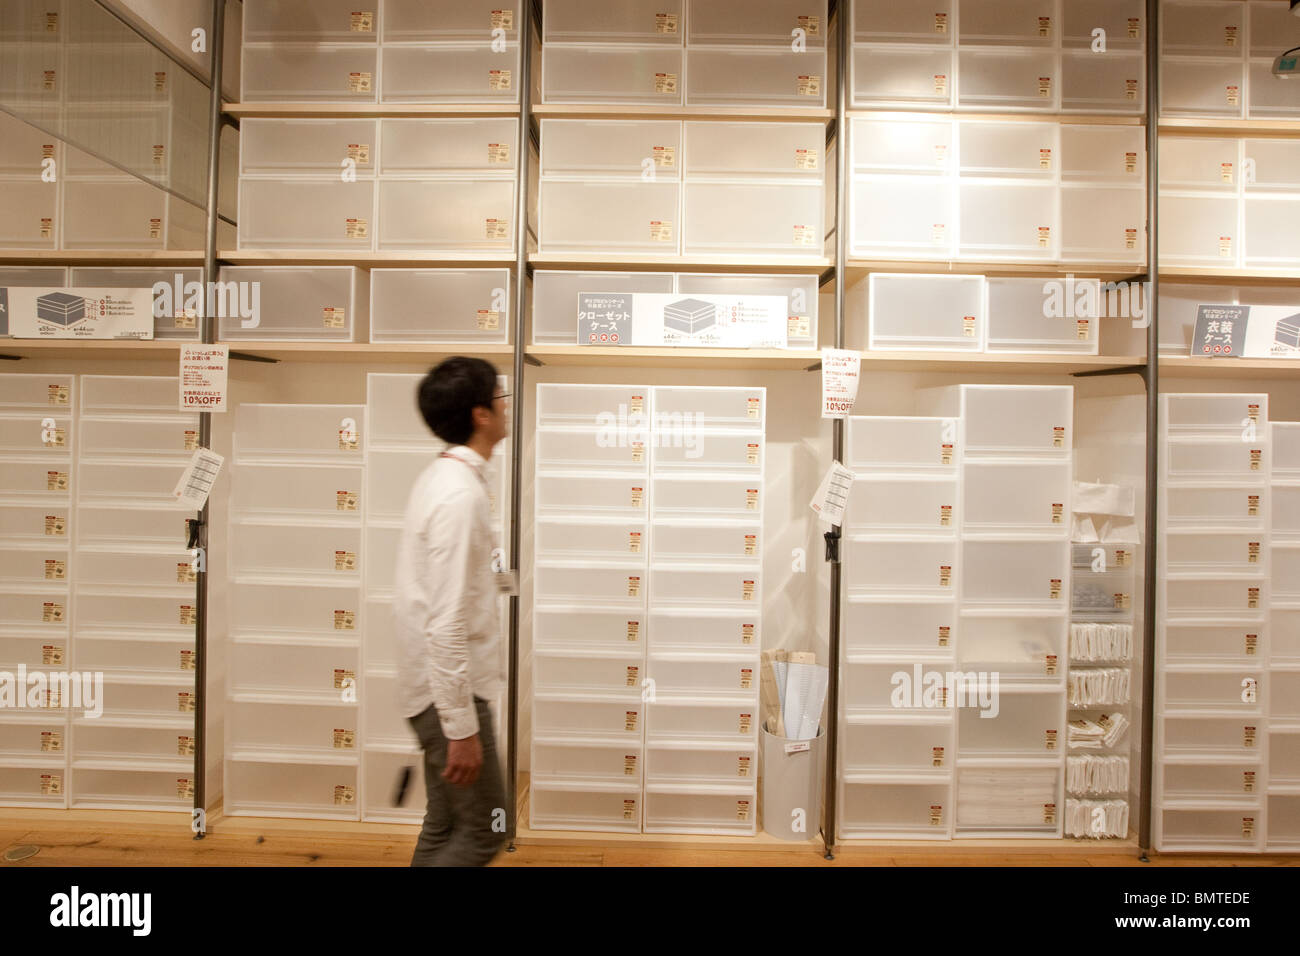 The Muji flagship store in Yurakucho district of Tokyo, Japan. Tuesday 27th April 2010. Stock Photo